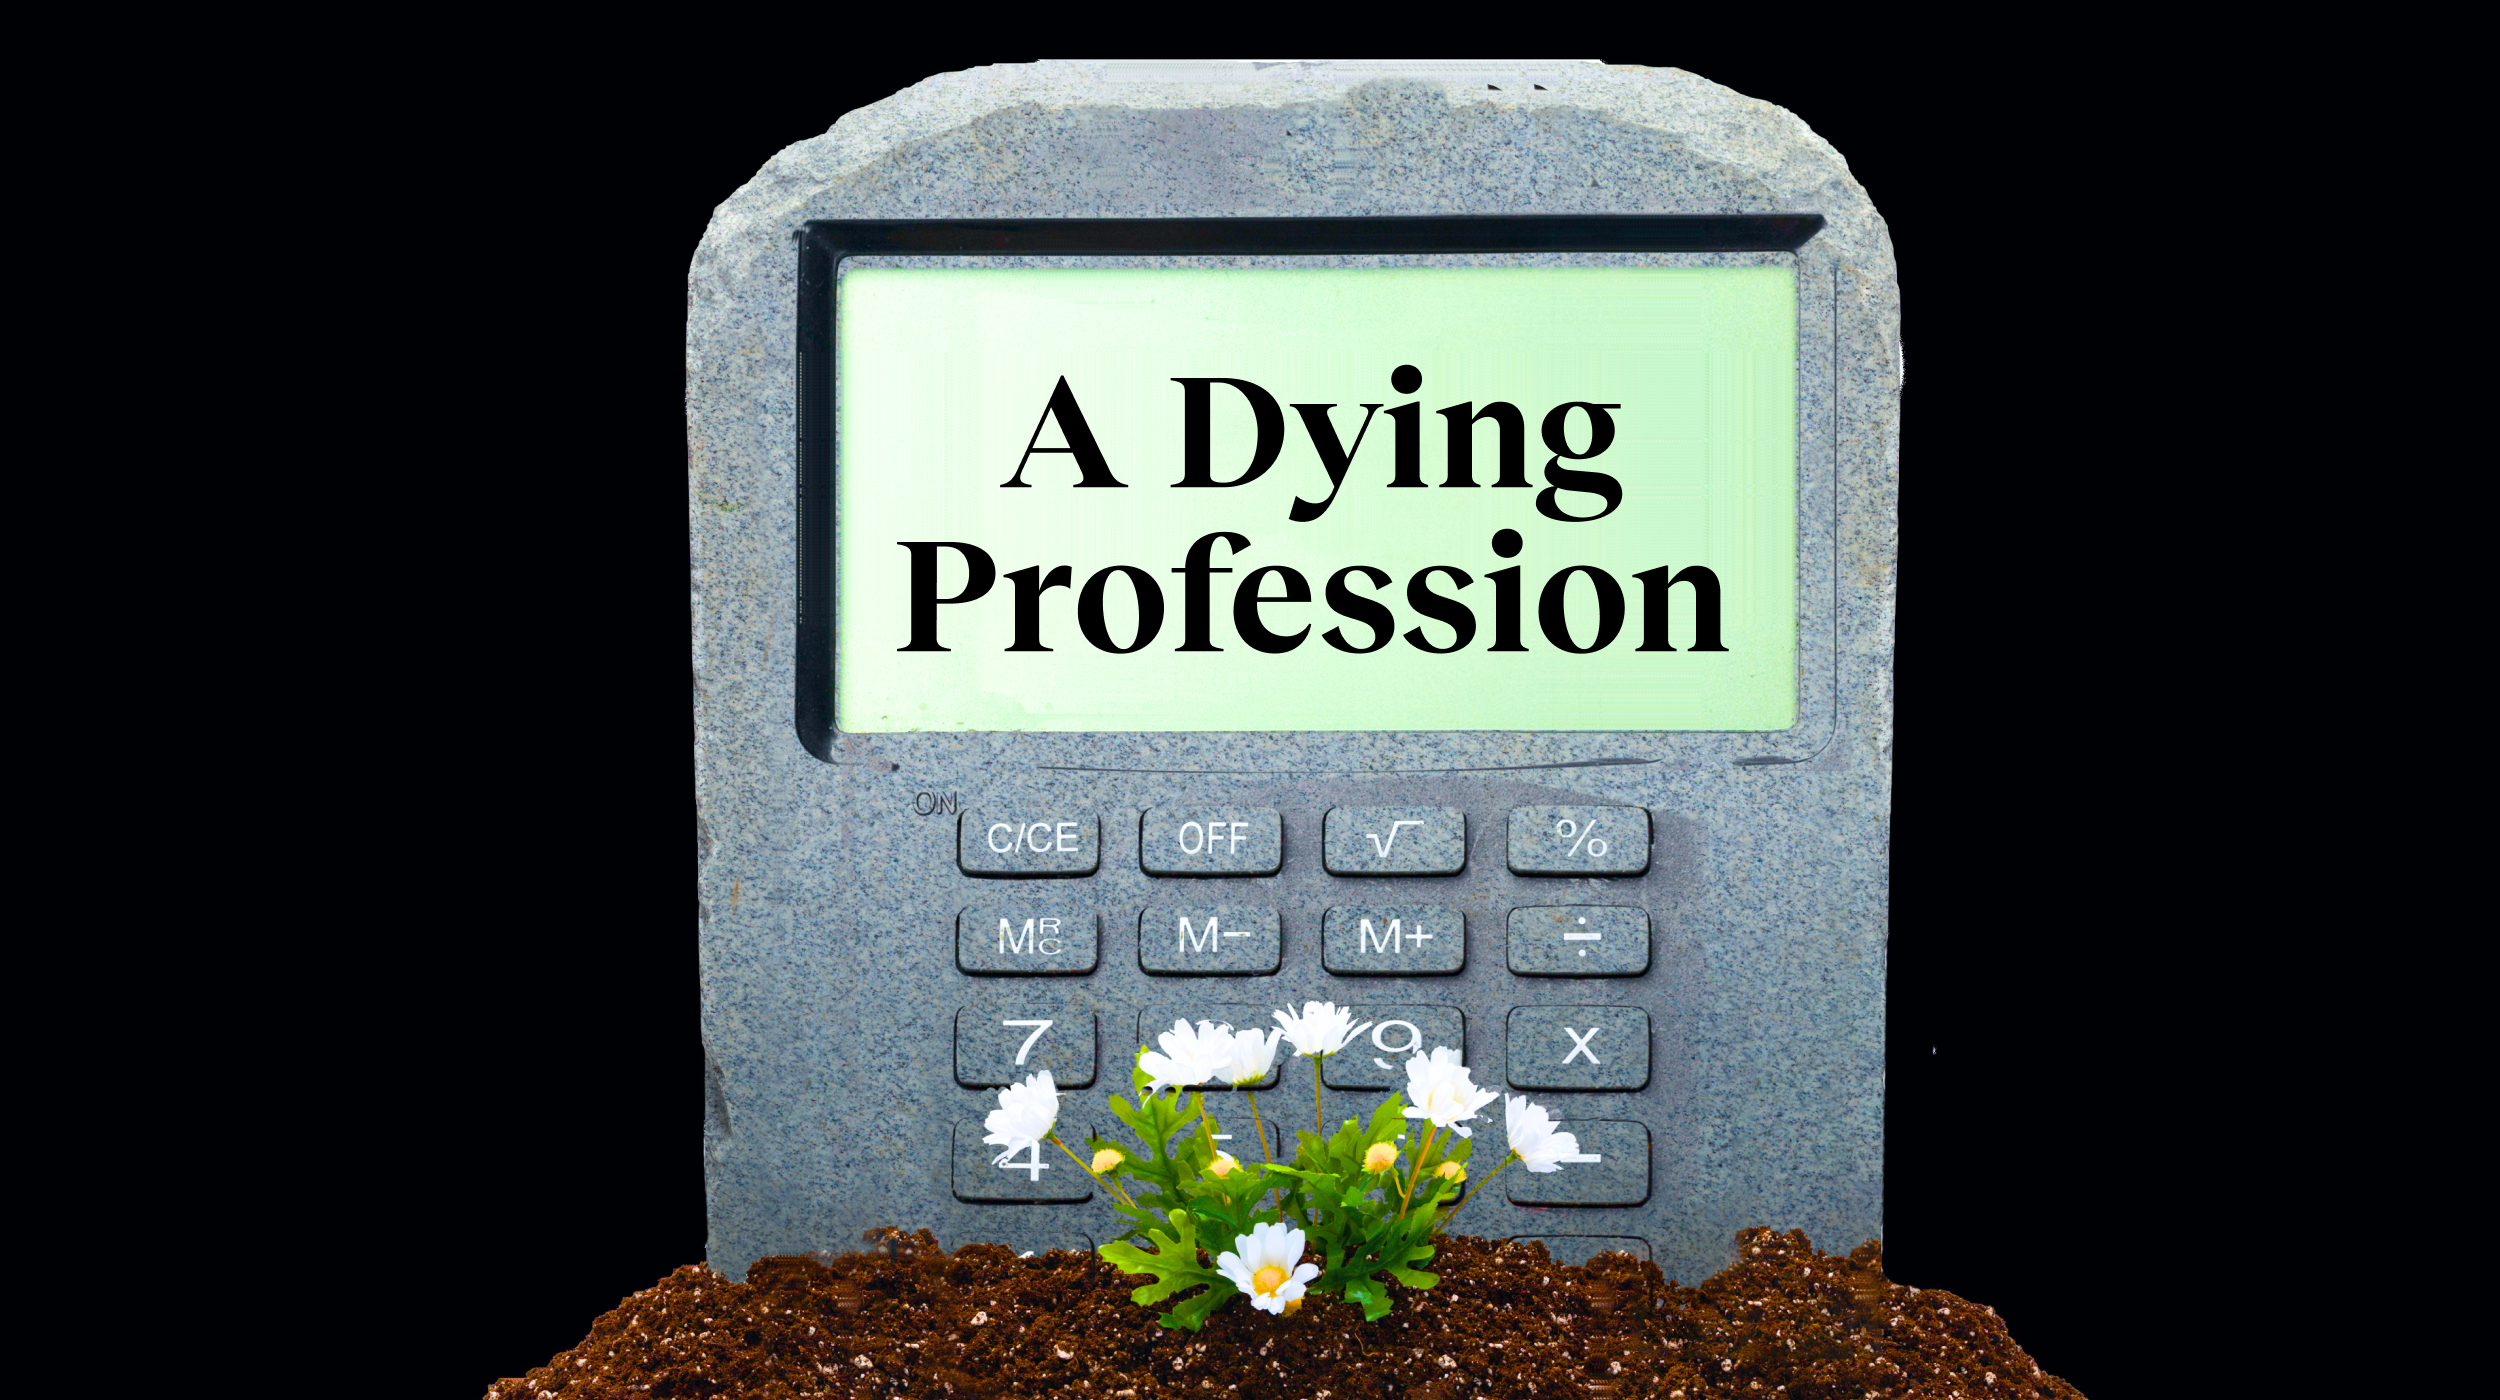 The cover of a dying profession.